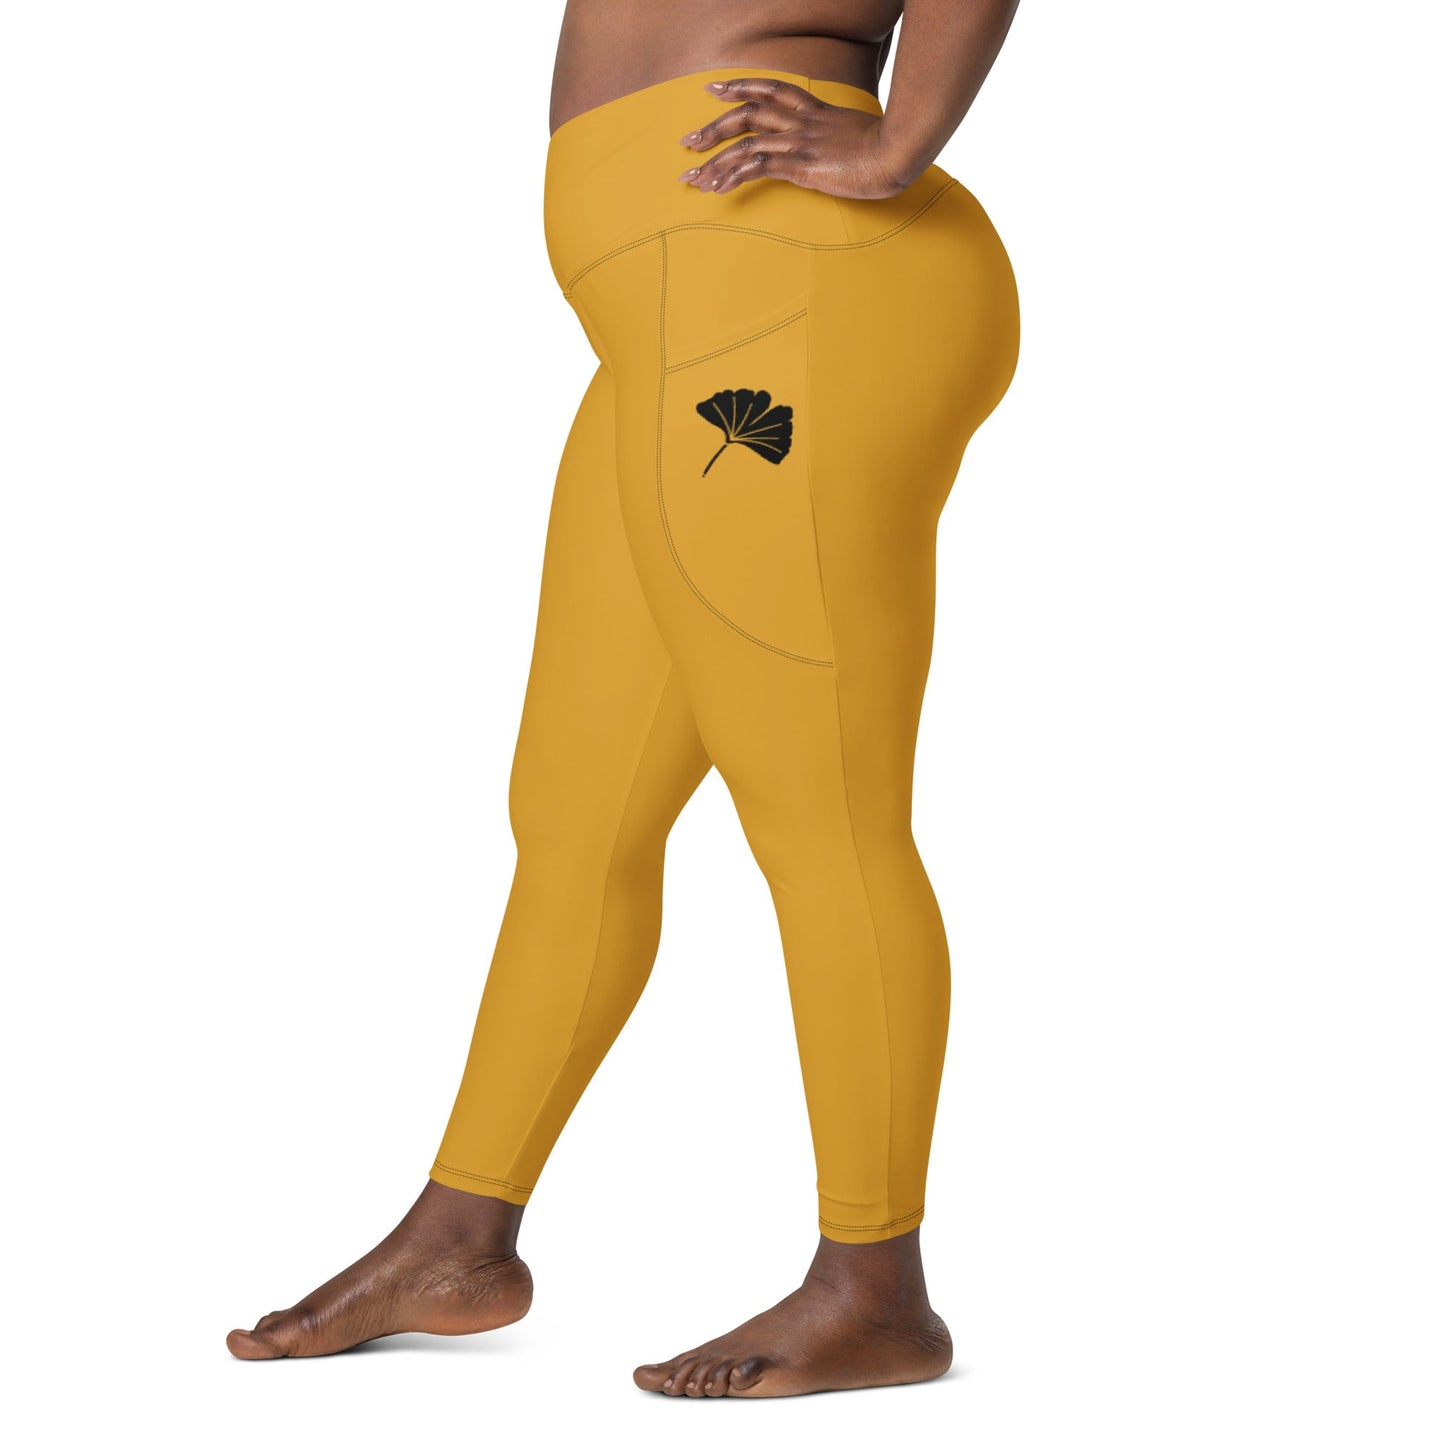 Gold Ginkgo Leaf CROSSOVER leggings with pockets - Appalachian Bittersweet - Crossover Waist